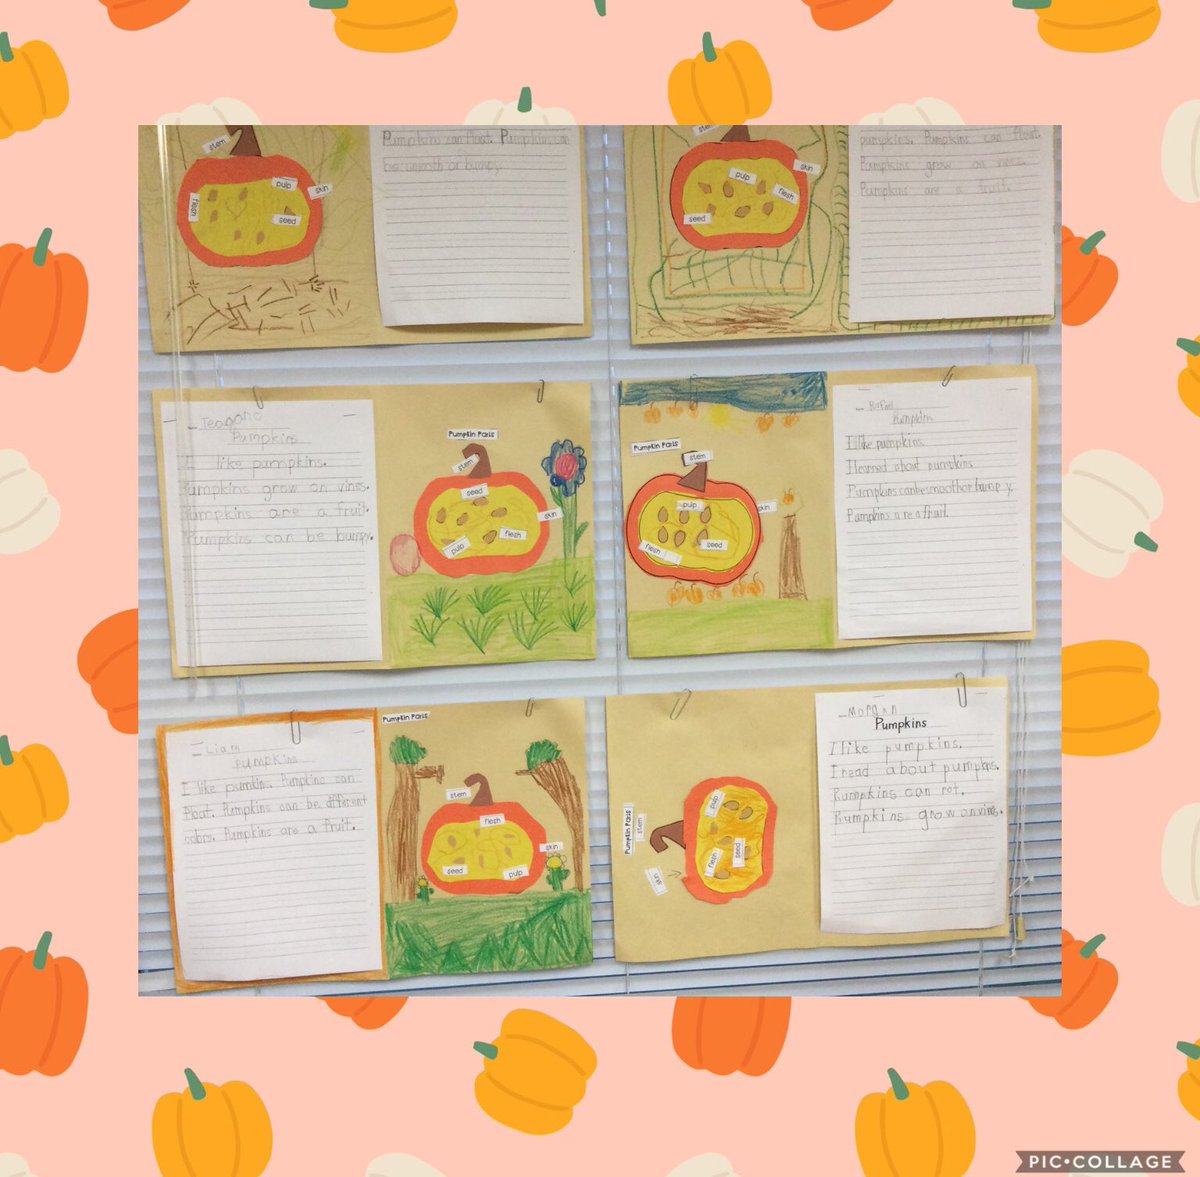 We started October by reading and writing about pumpkins! @VineyardsVipers